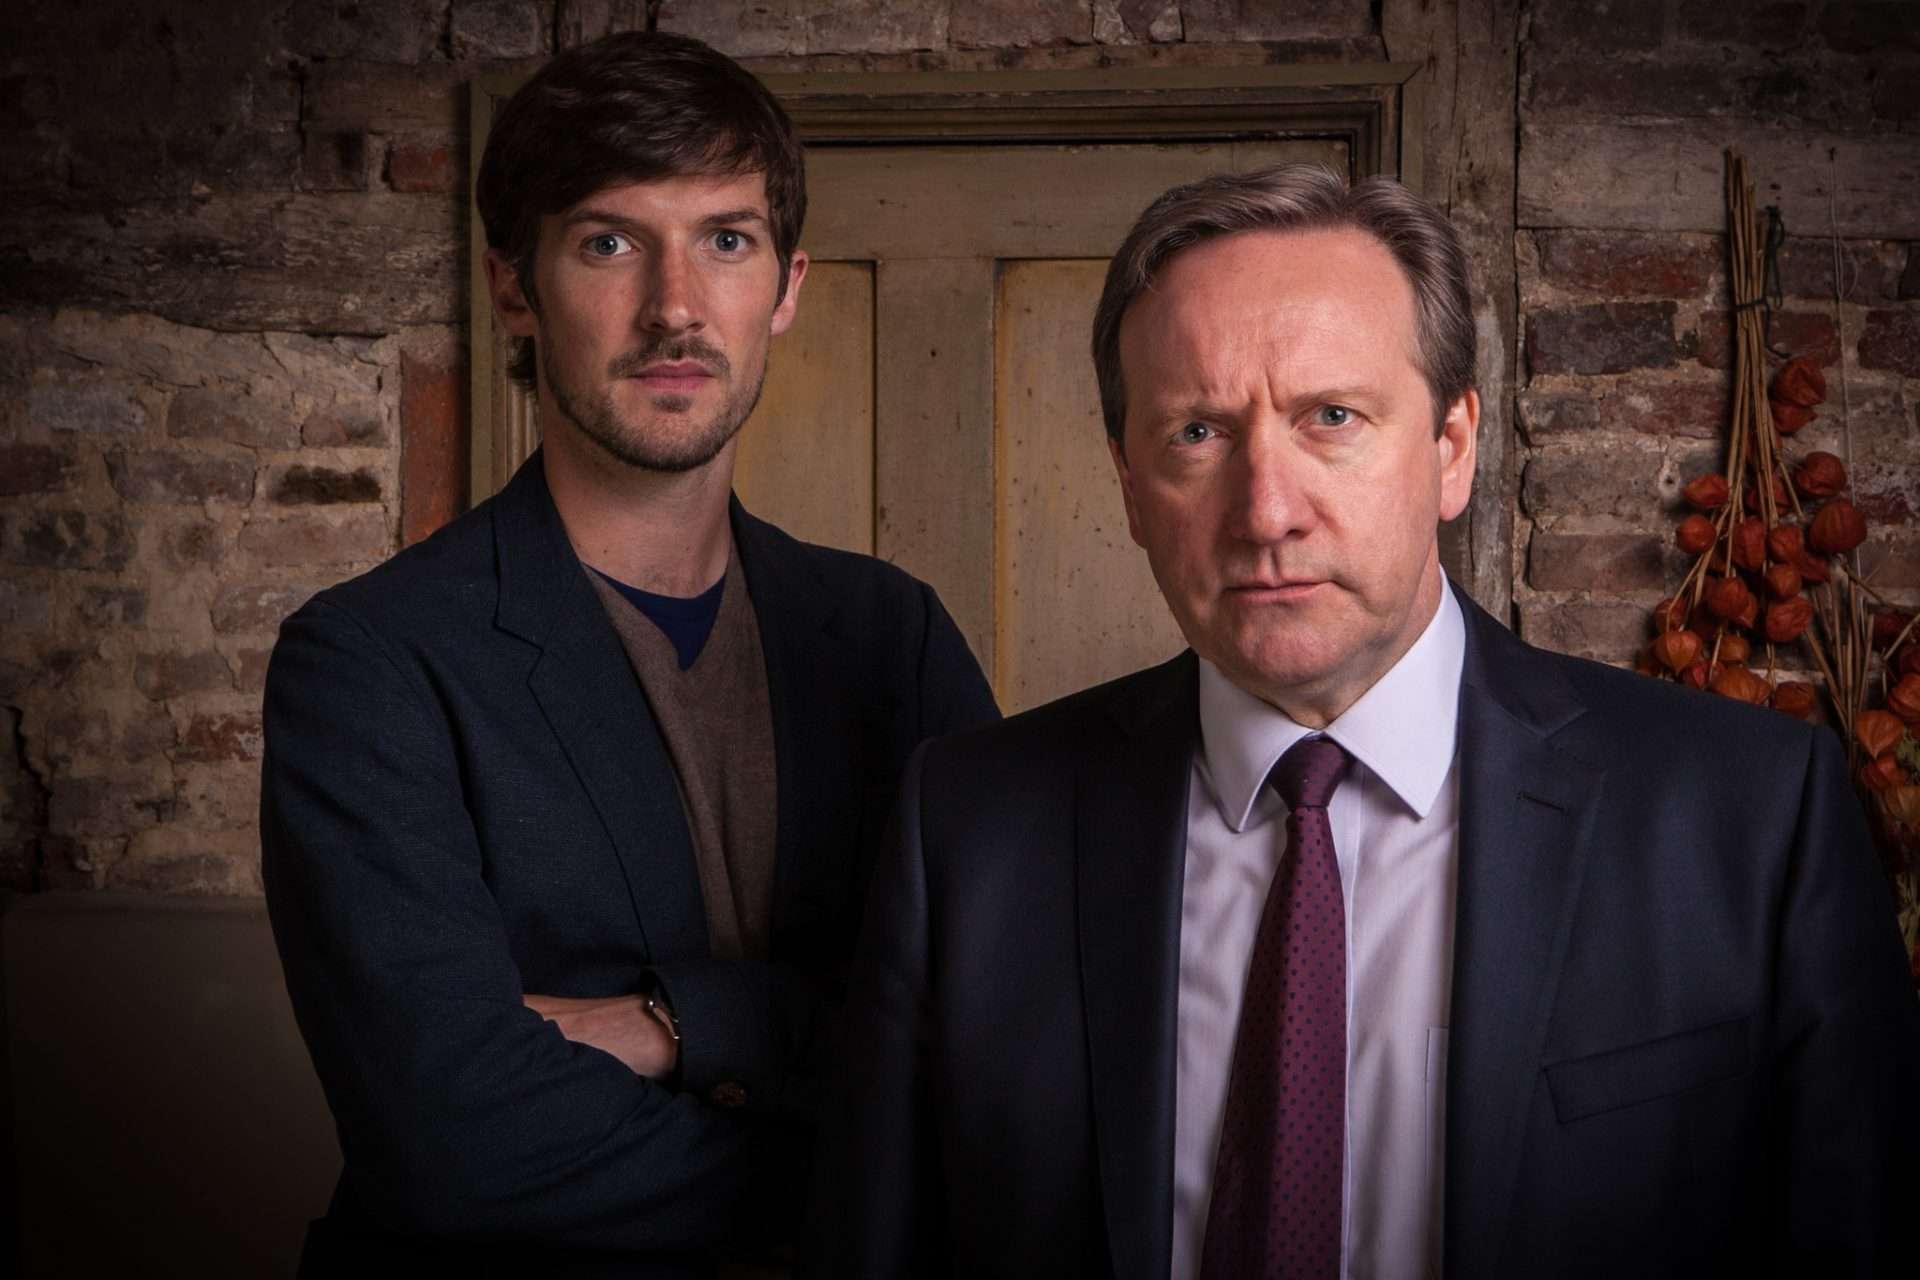 7 Shows To Watch If You Like ‘Only Murders in the Building’ on Hulu - Midsomer Murders (1997)